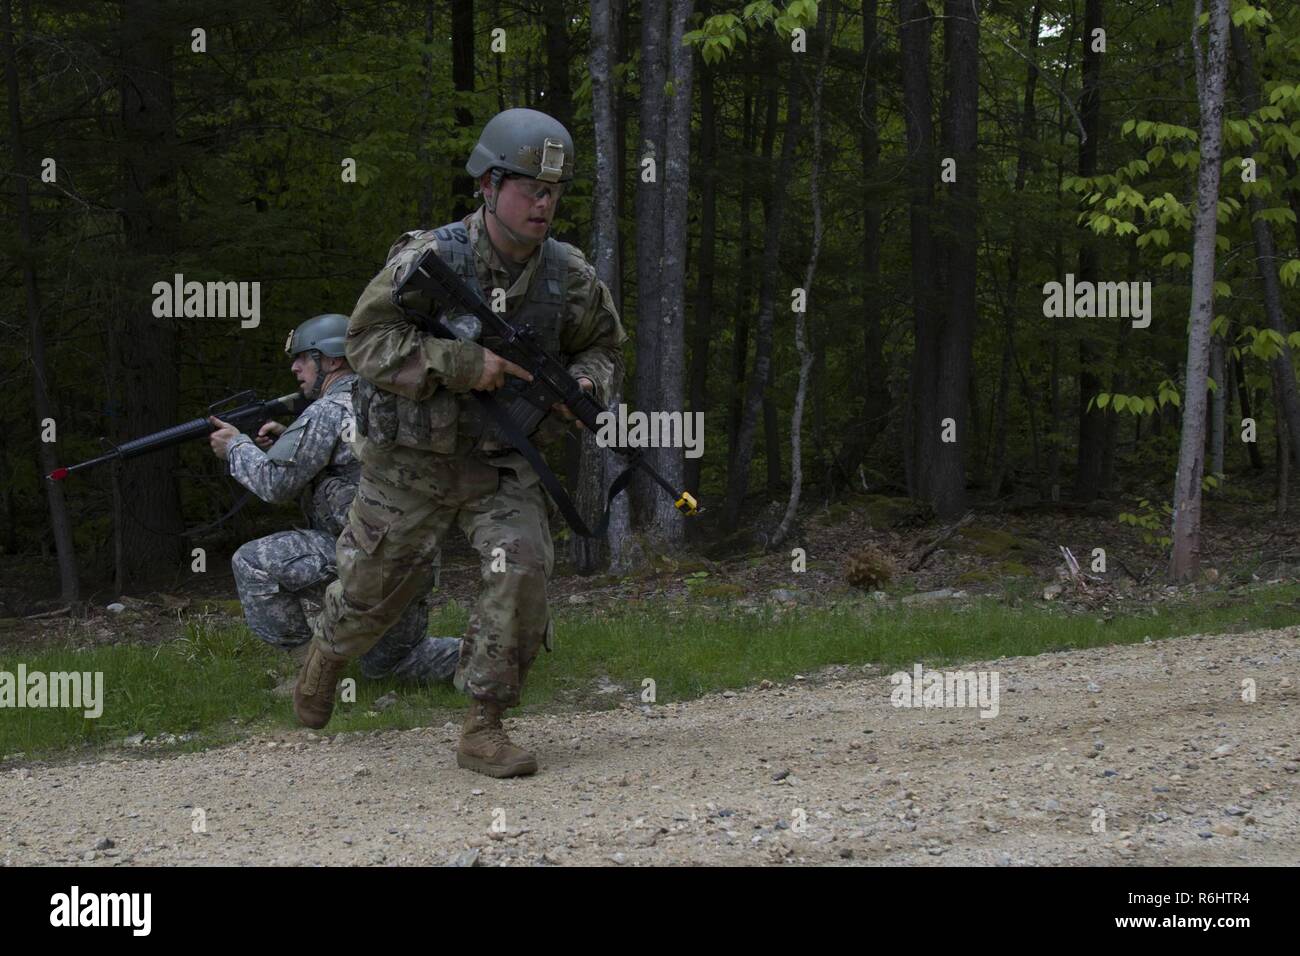 A U.S. Army officer candidate crosses a linear danger area (road) during a reconnaissance operations lane at New Hampshire National Guard Training Site in Center Strafford, Nh., May 19, 2017. Soldiers from Connecticut, Maine, Massachusetts, New Hampshire, New Jersey, New York, Rhode Island, and Vermont participated in the Officer Candidate School Field Leadership Exercise in preparation for graduation and commission. Stock Photo